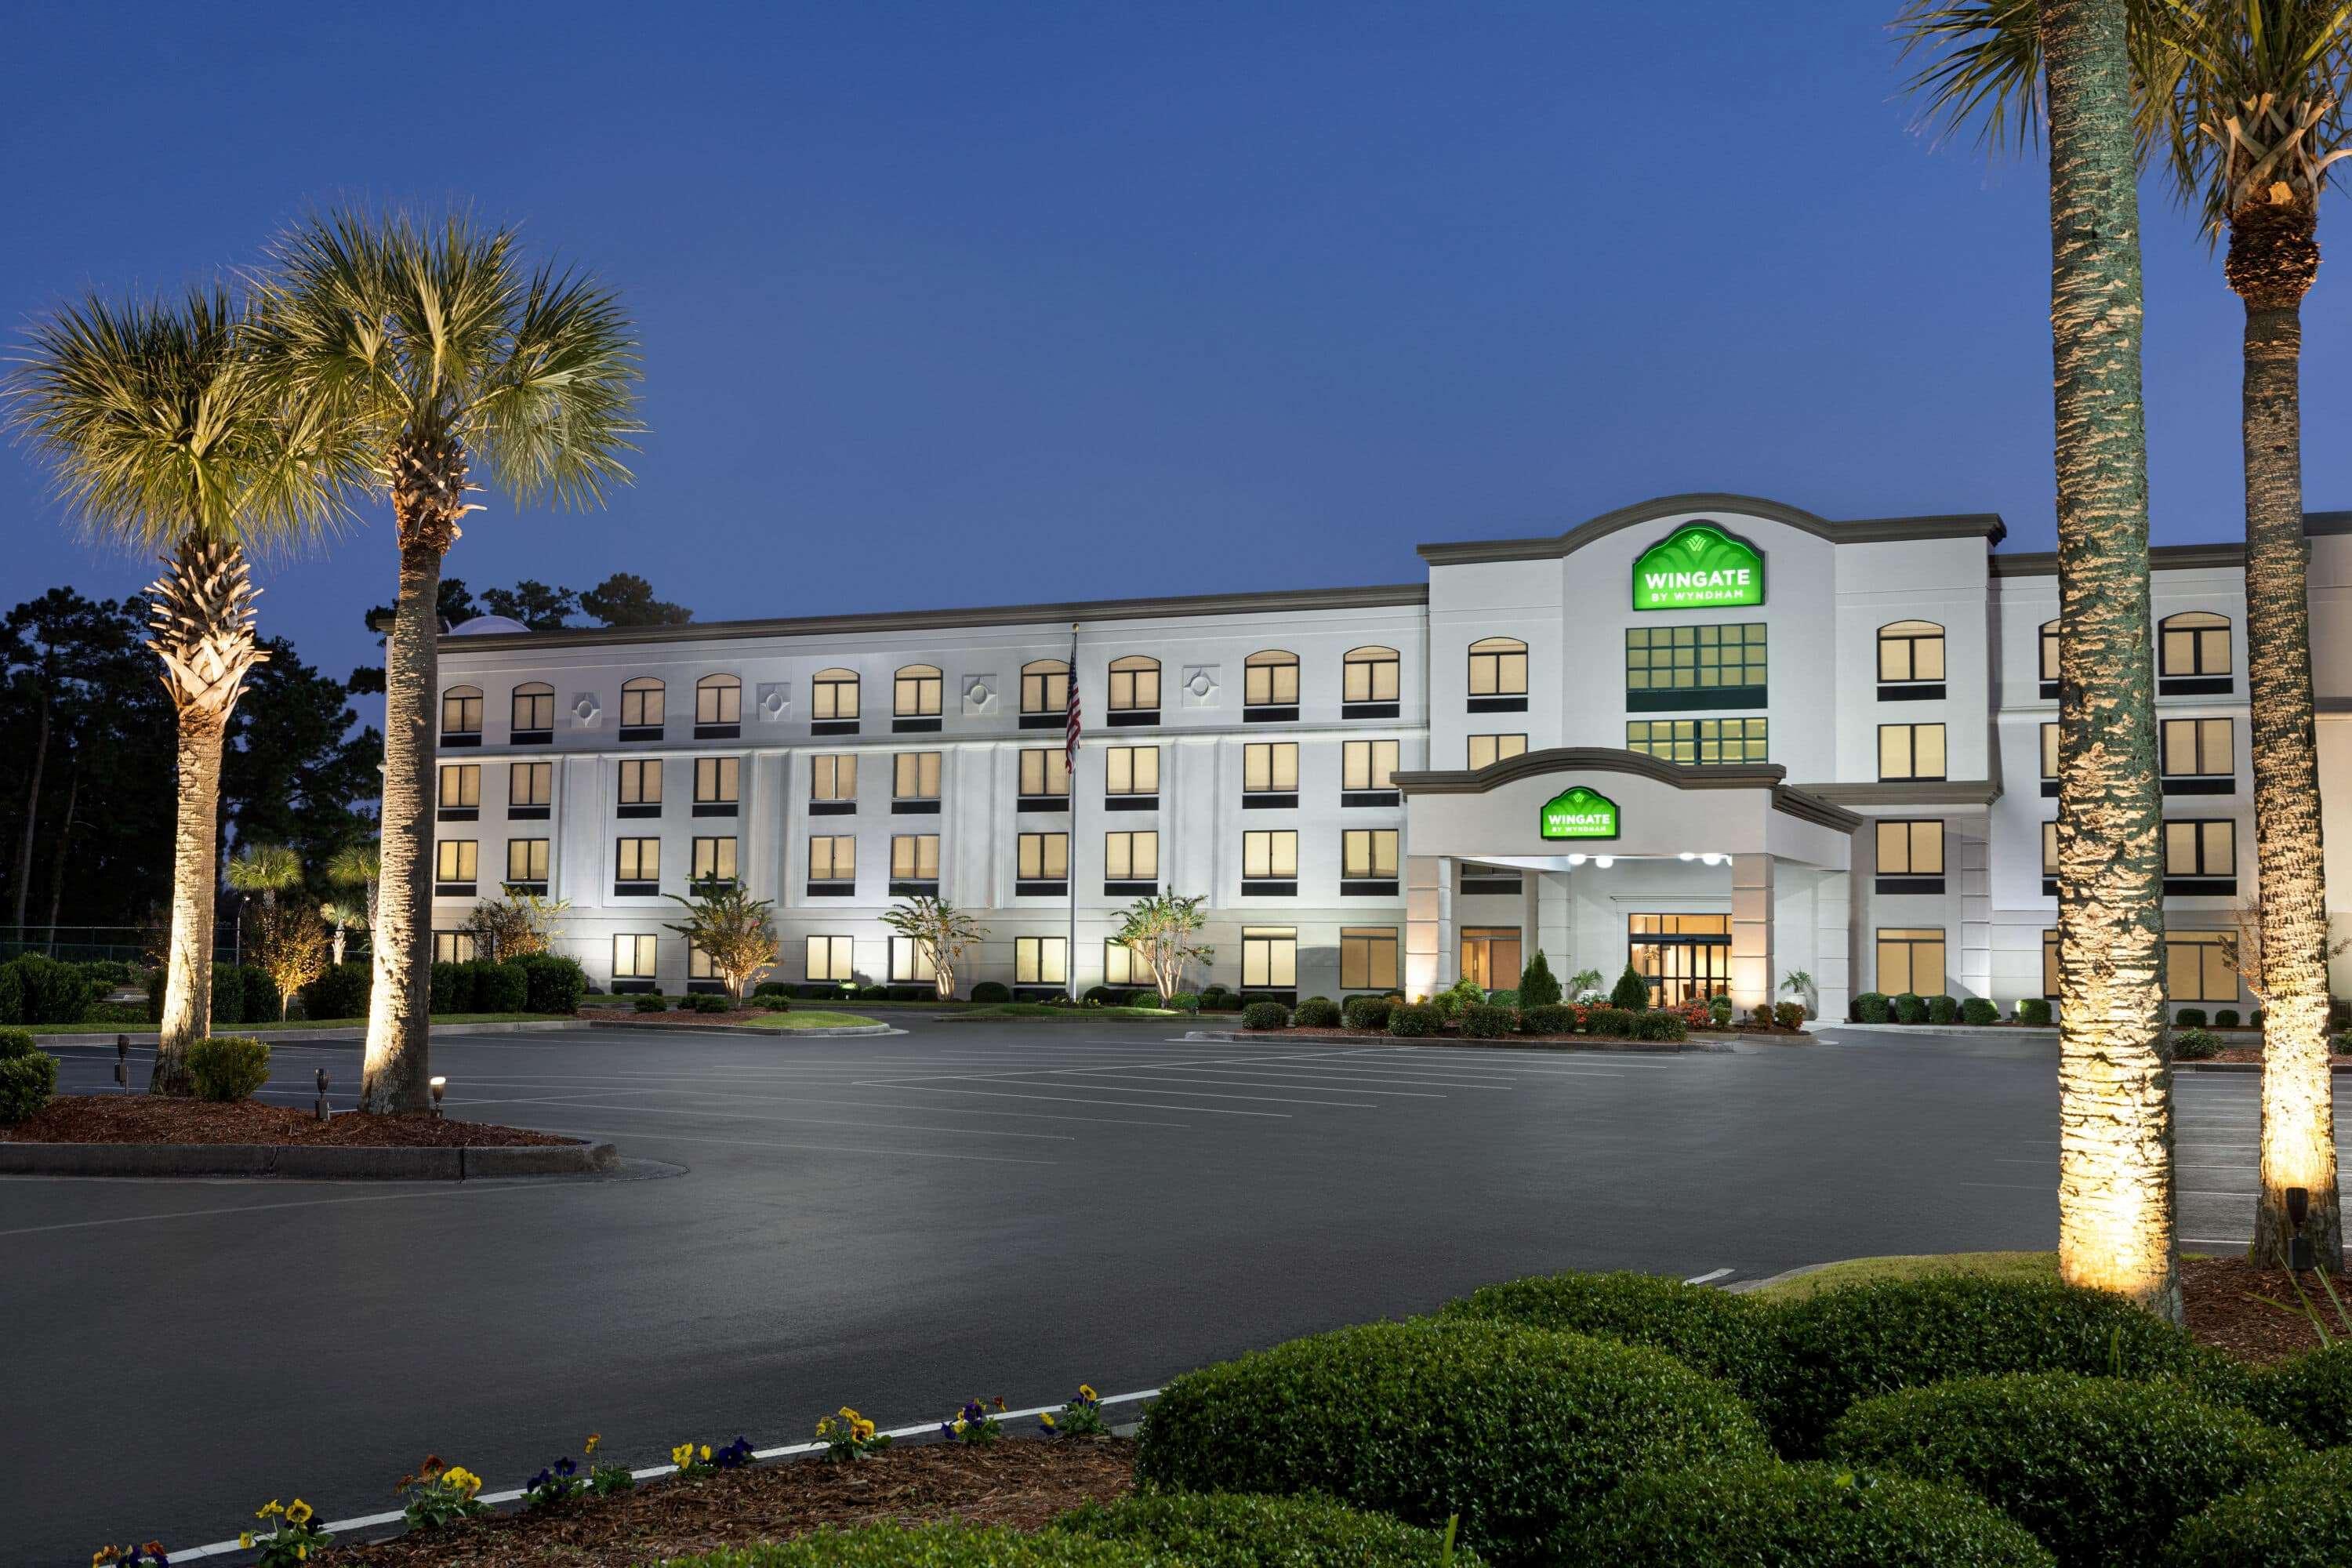 Wingate By Wyndham Wilmington Hotel Exterior photo